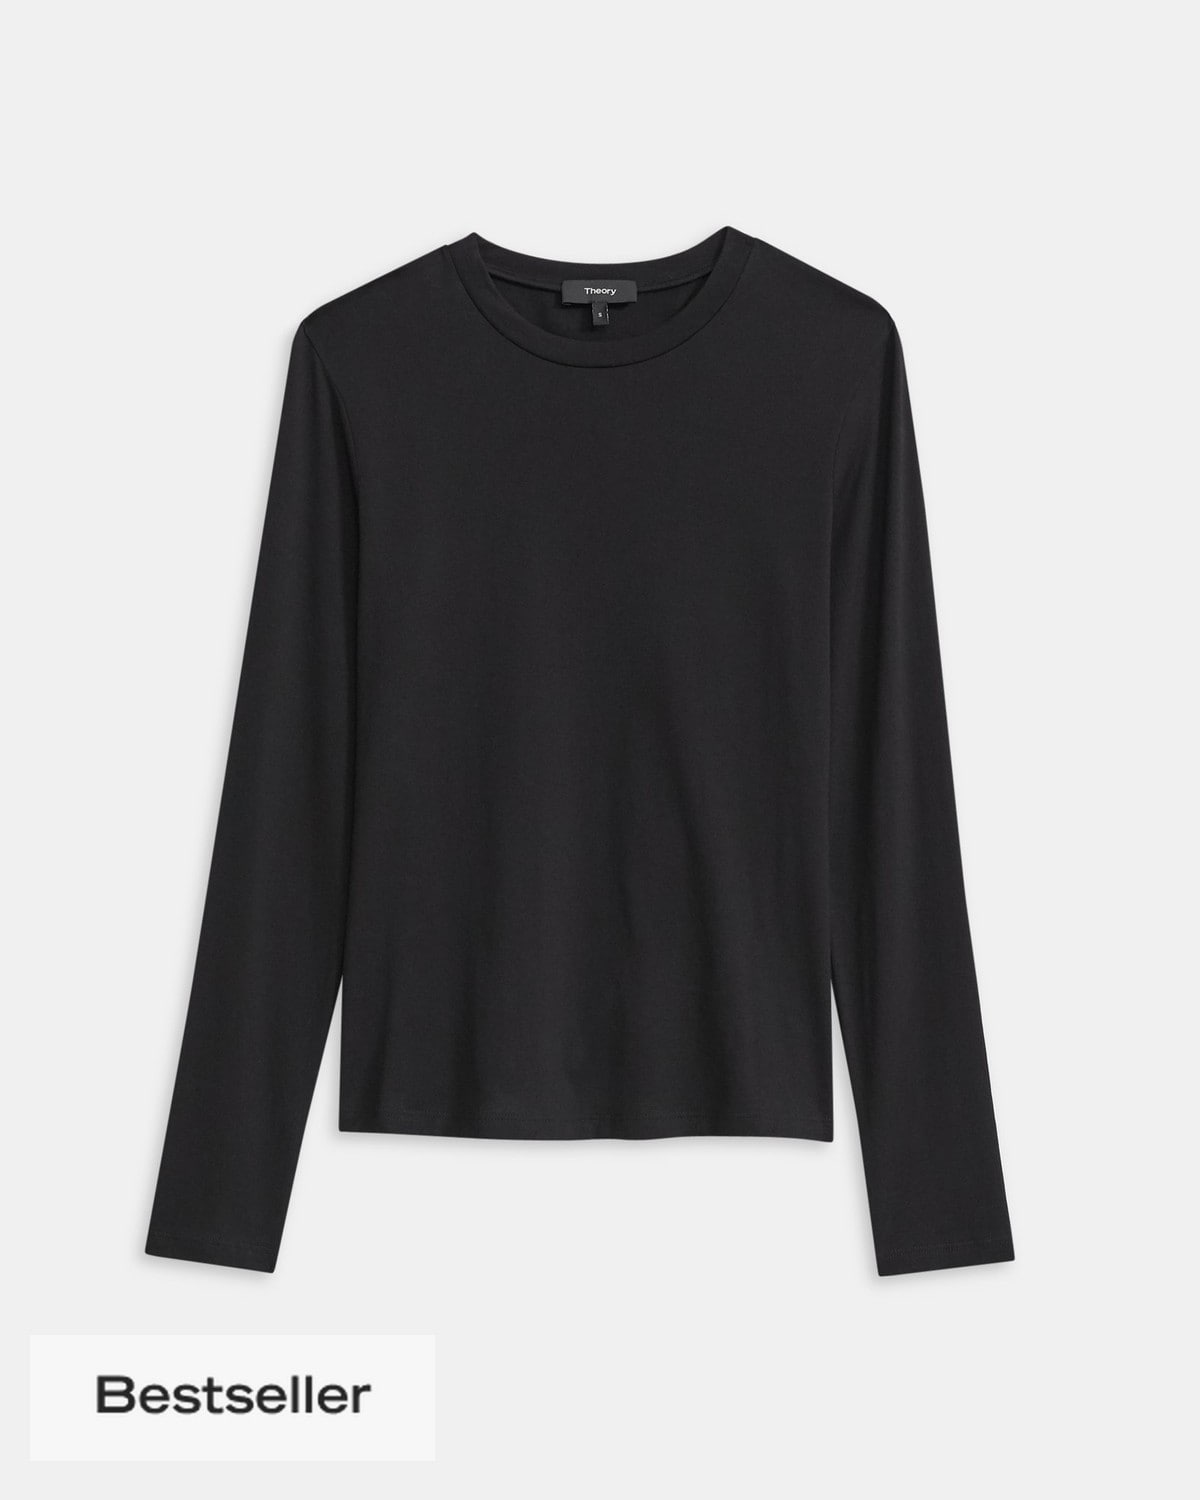 Long-Sleeve Tiny Tee in Cotton